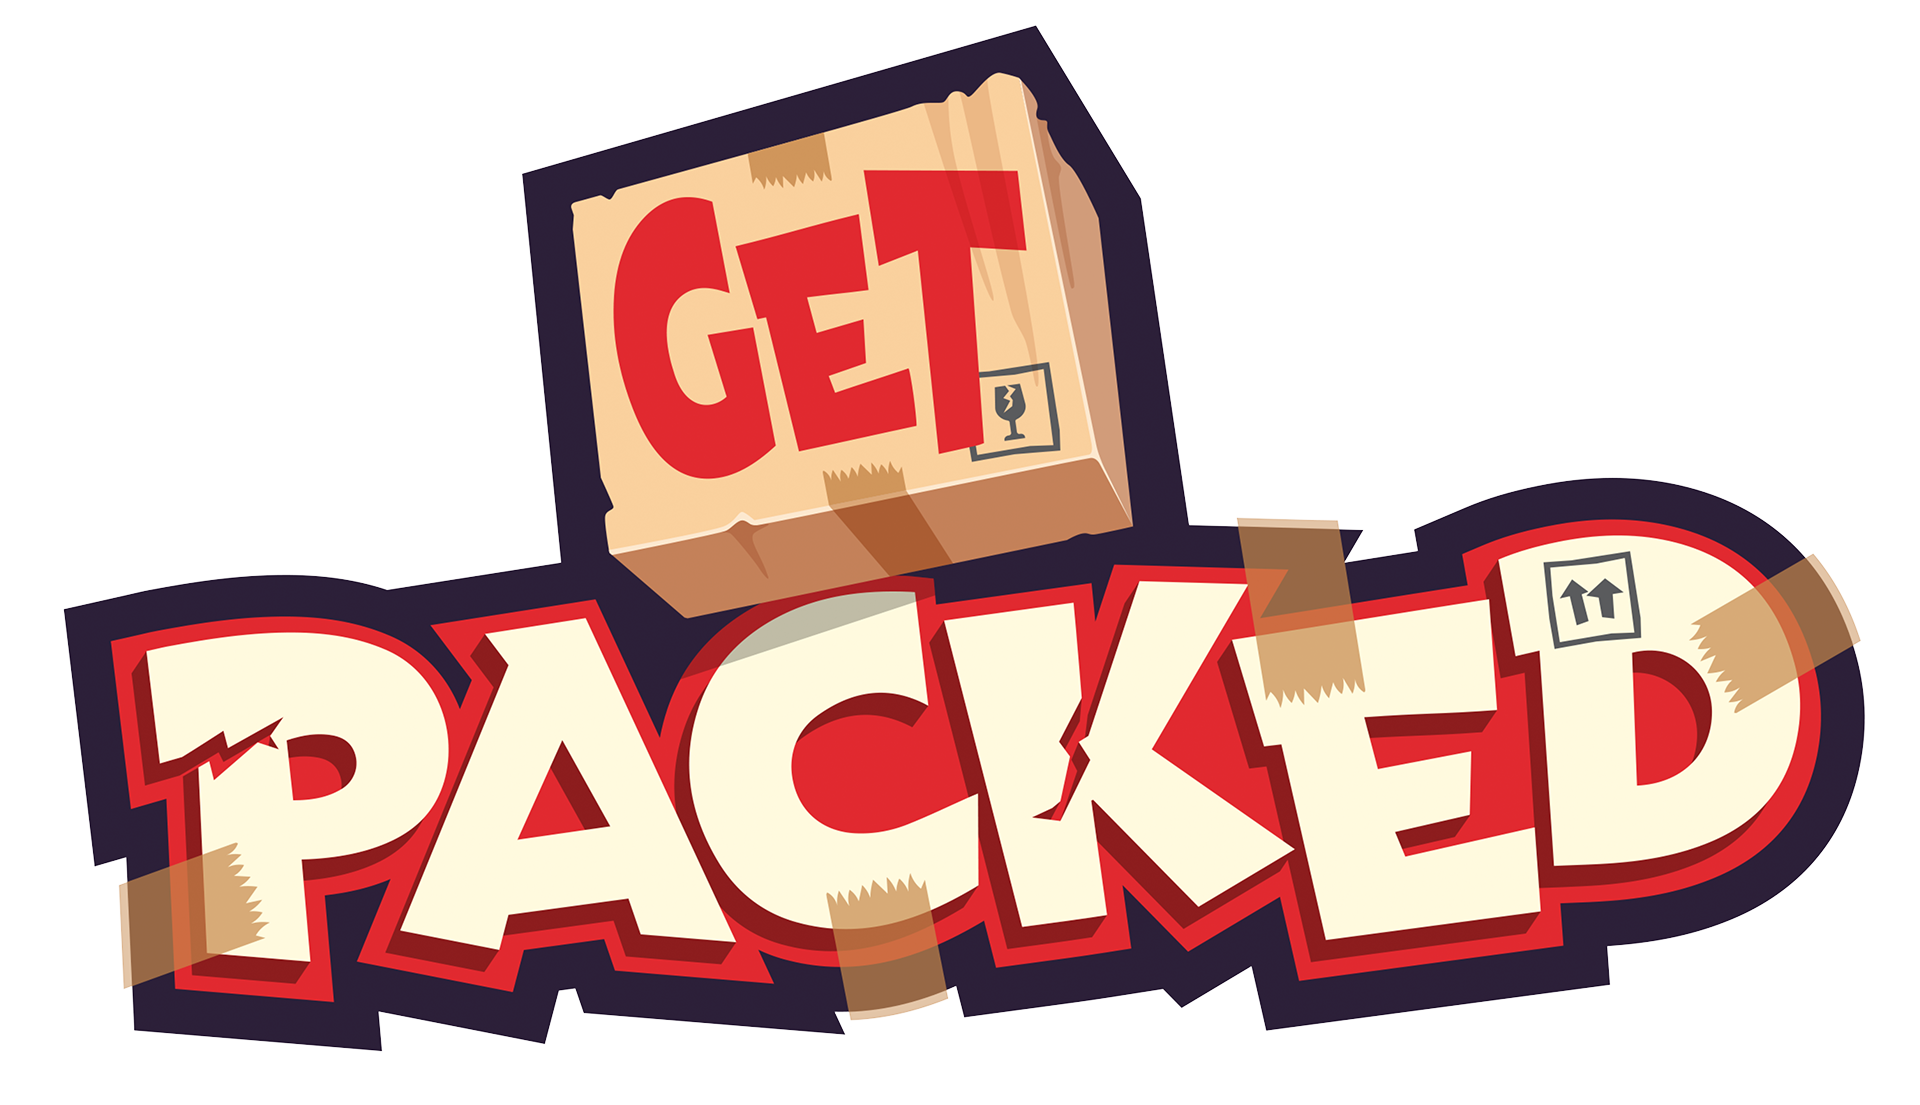 Get Packed Couch Chaos Logo